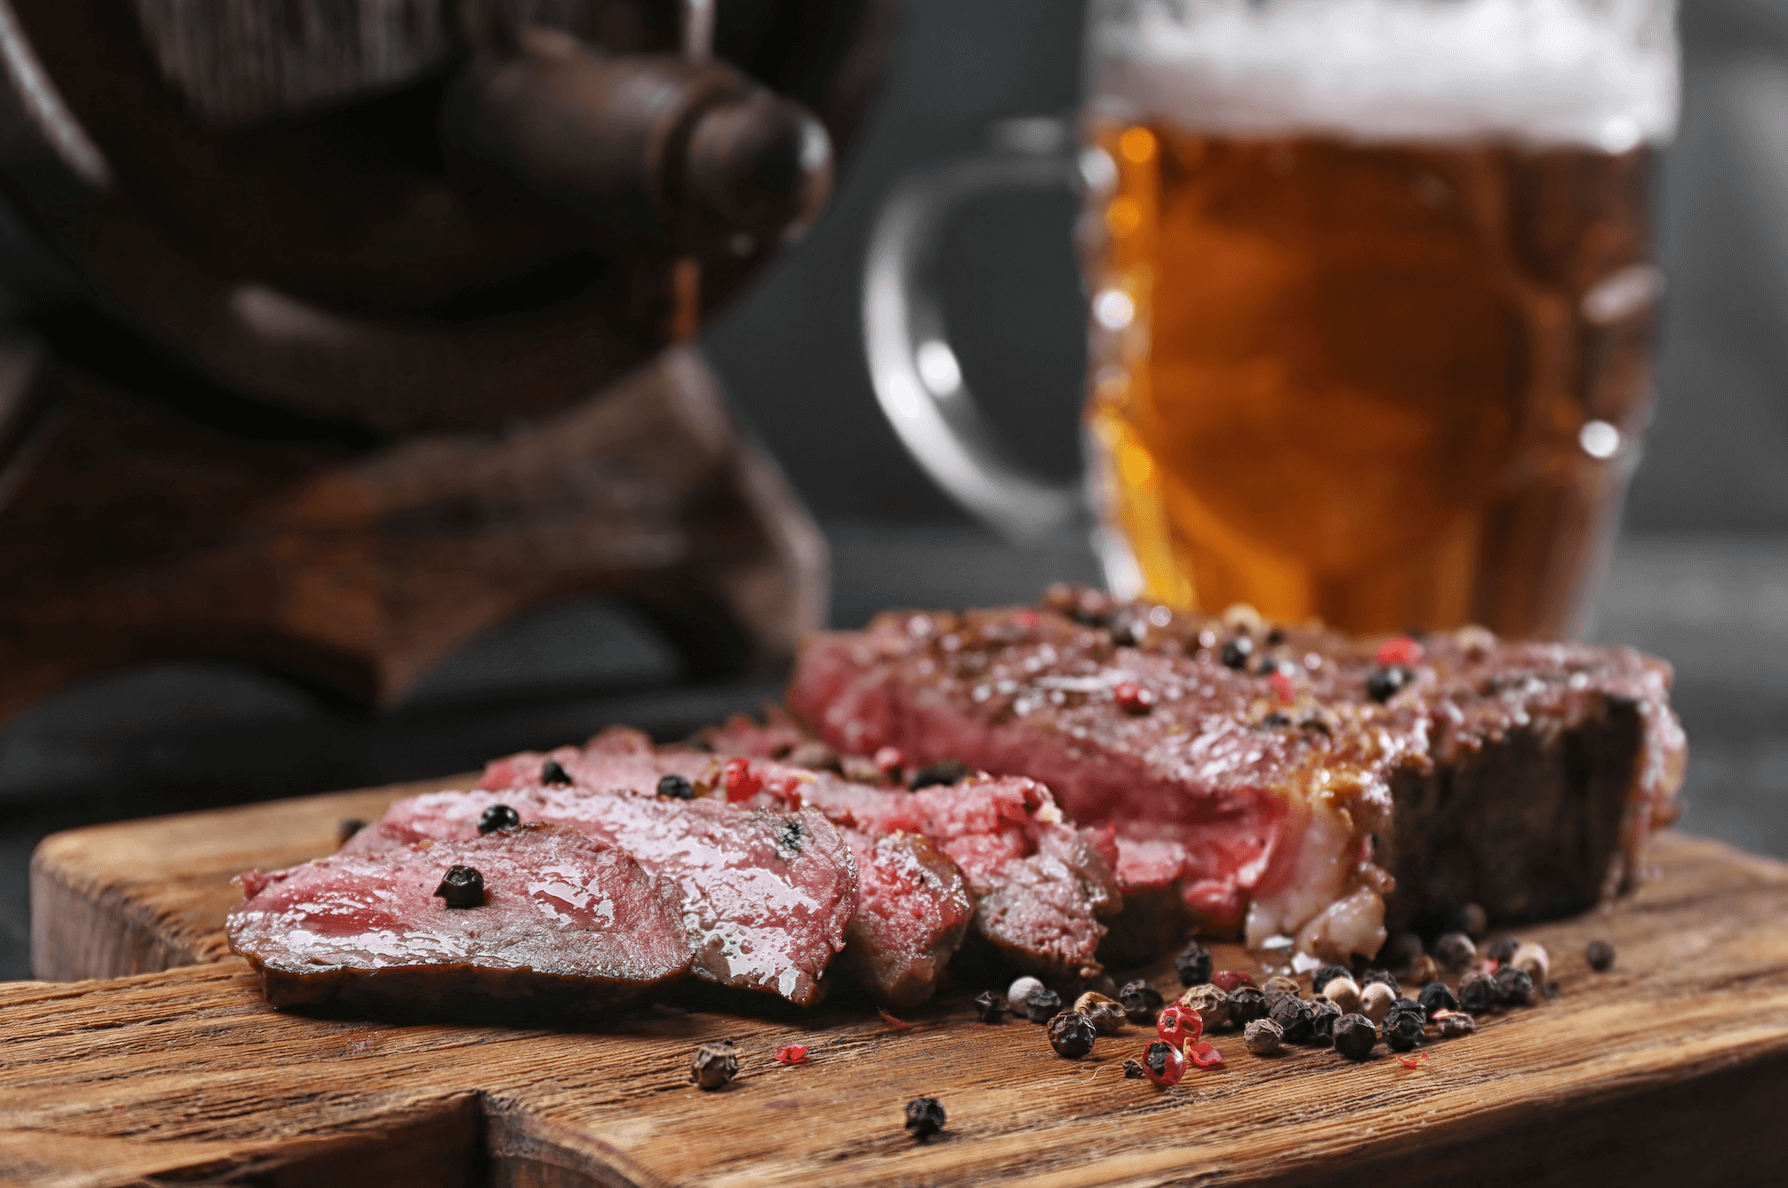 What Are the Best Types of Beer to Have With Steak?